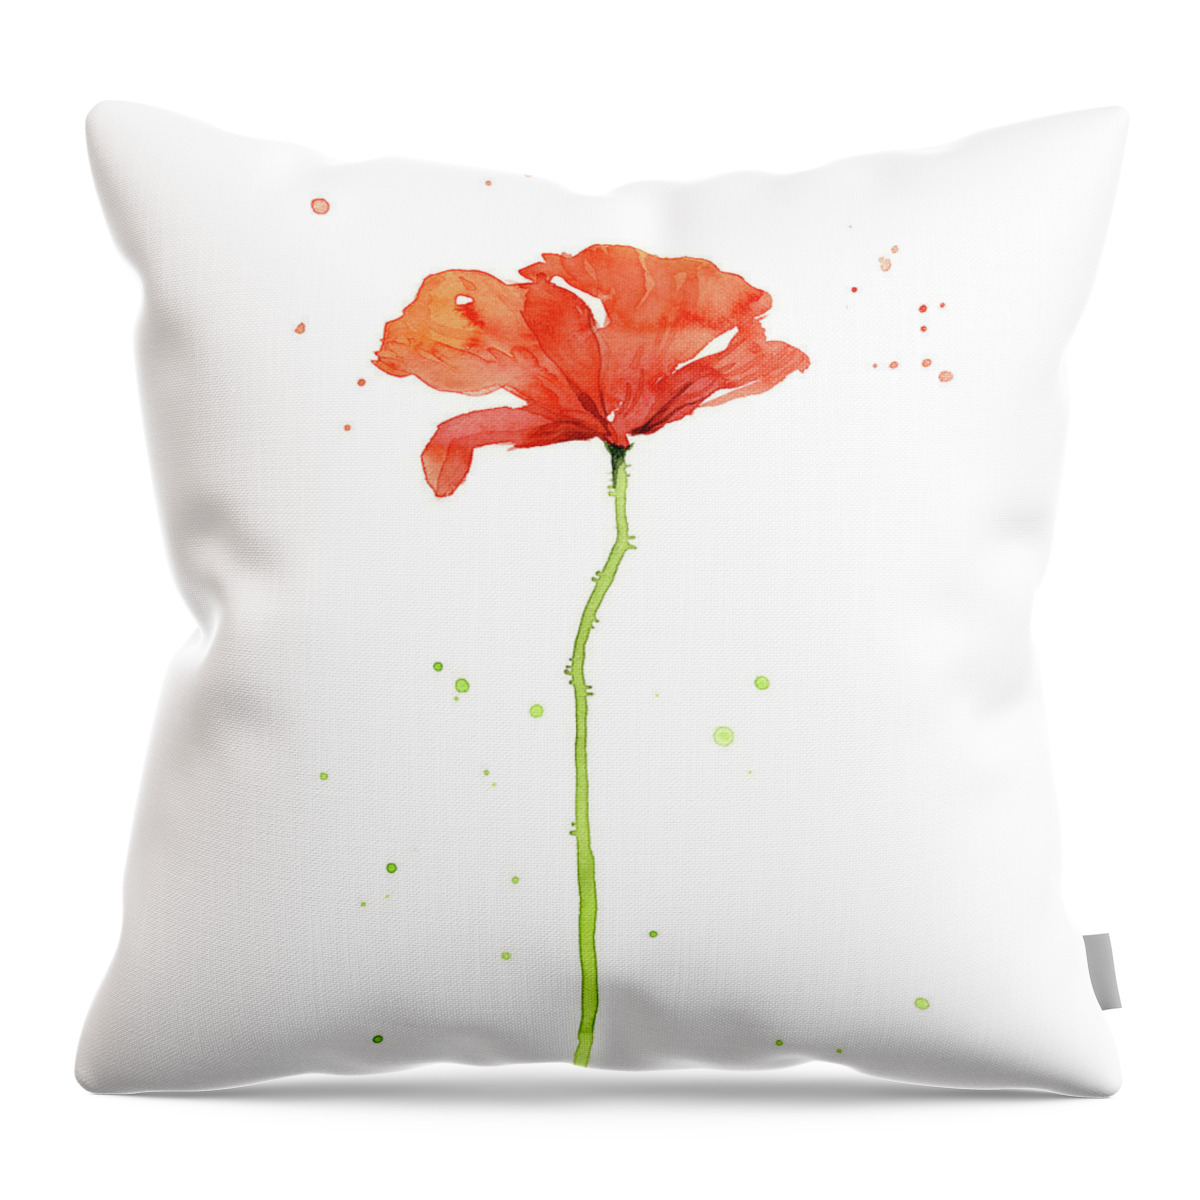 Poppy Throw Pillow featuring the painting Red Poppy Watercolor by Olga Shvartsur